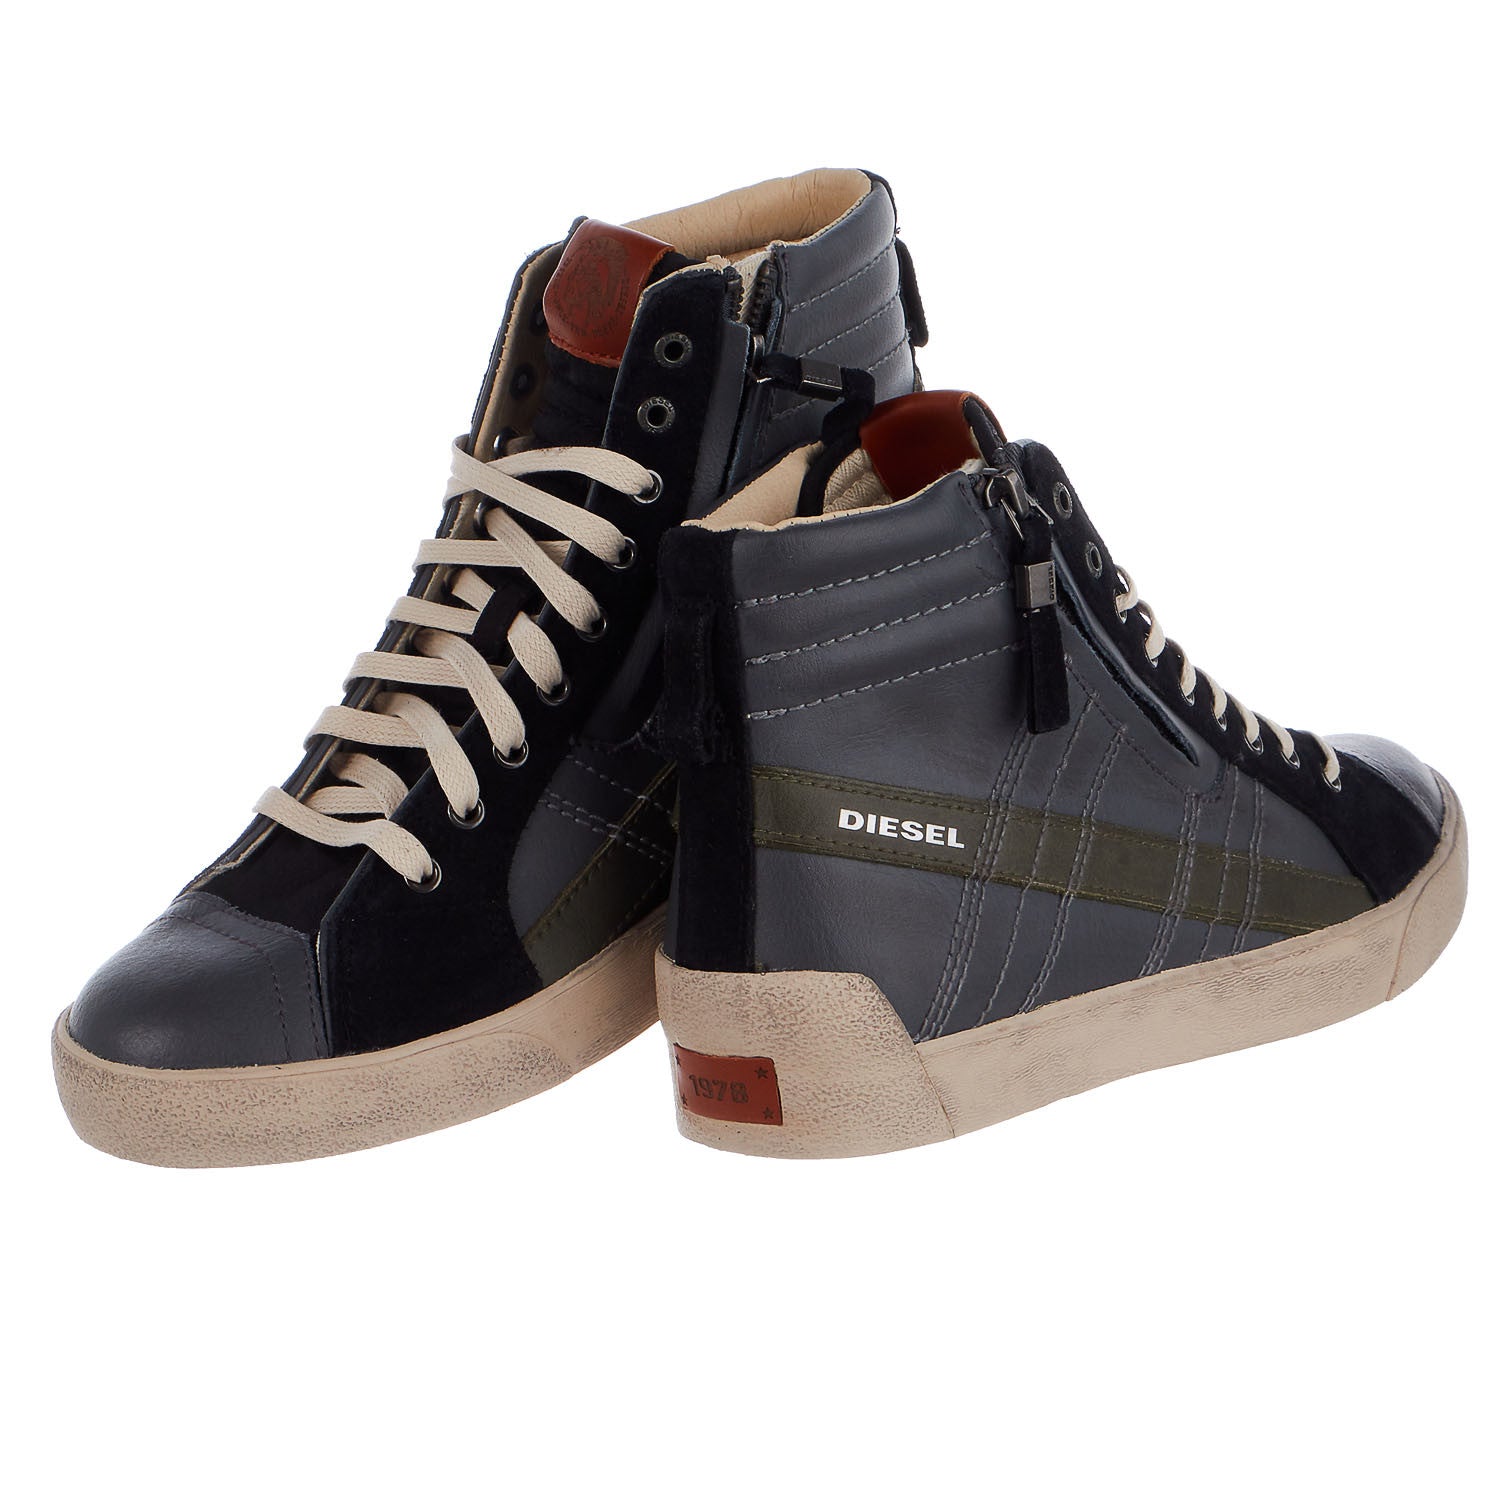 Discover 267+ diesel fashion sneakers